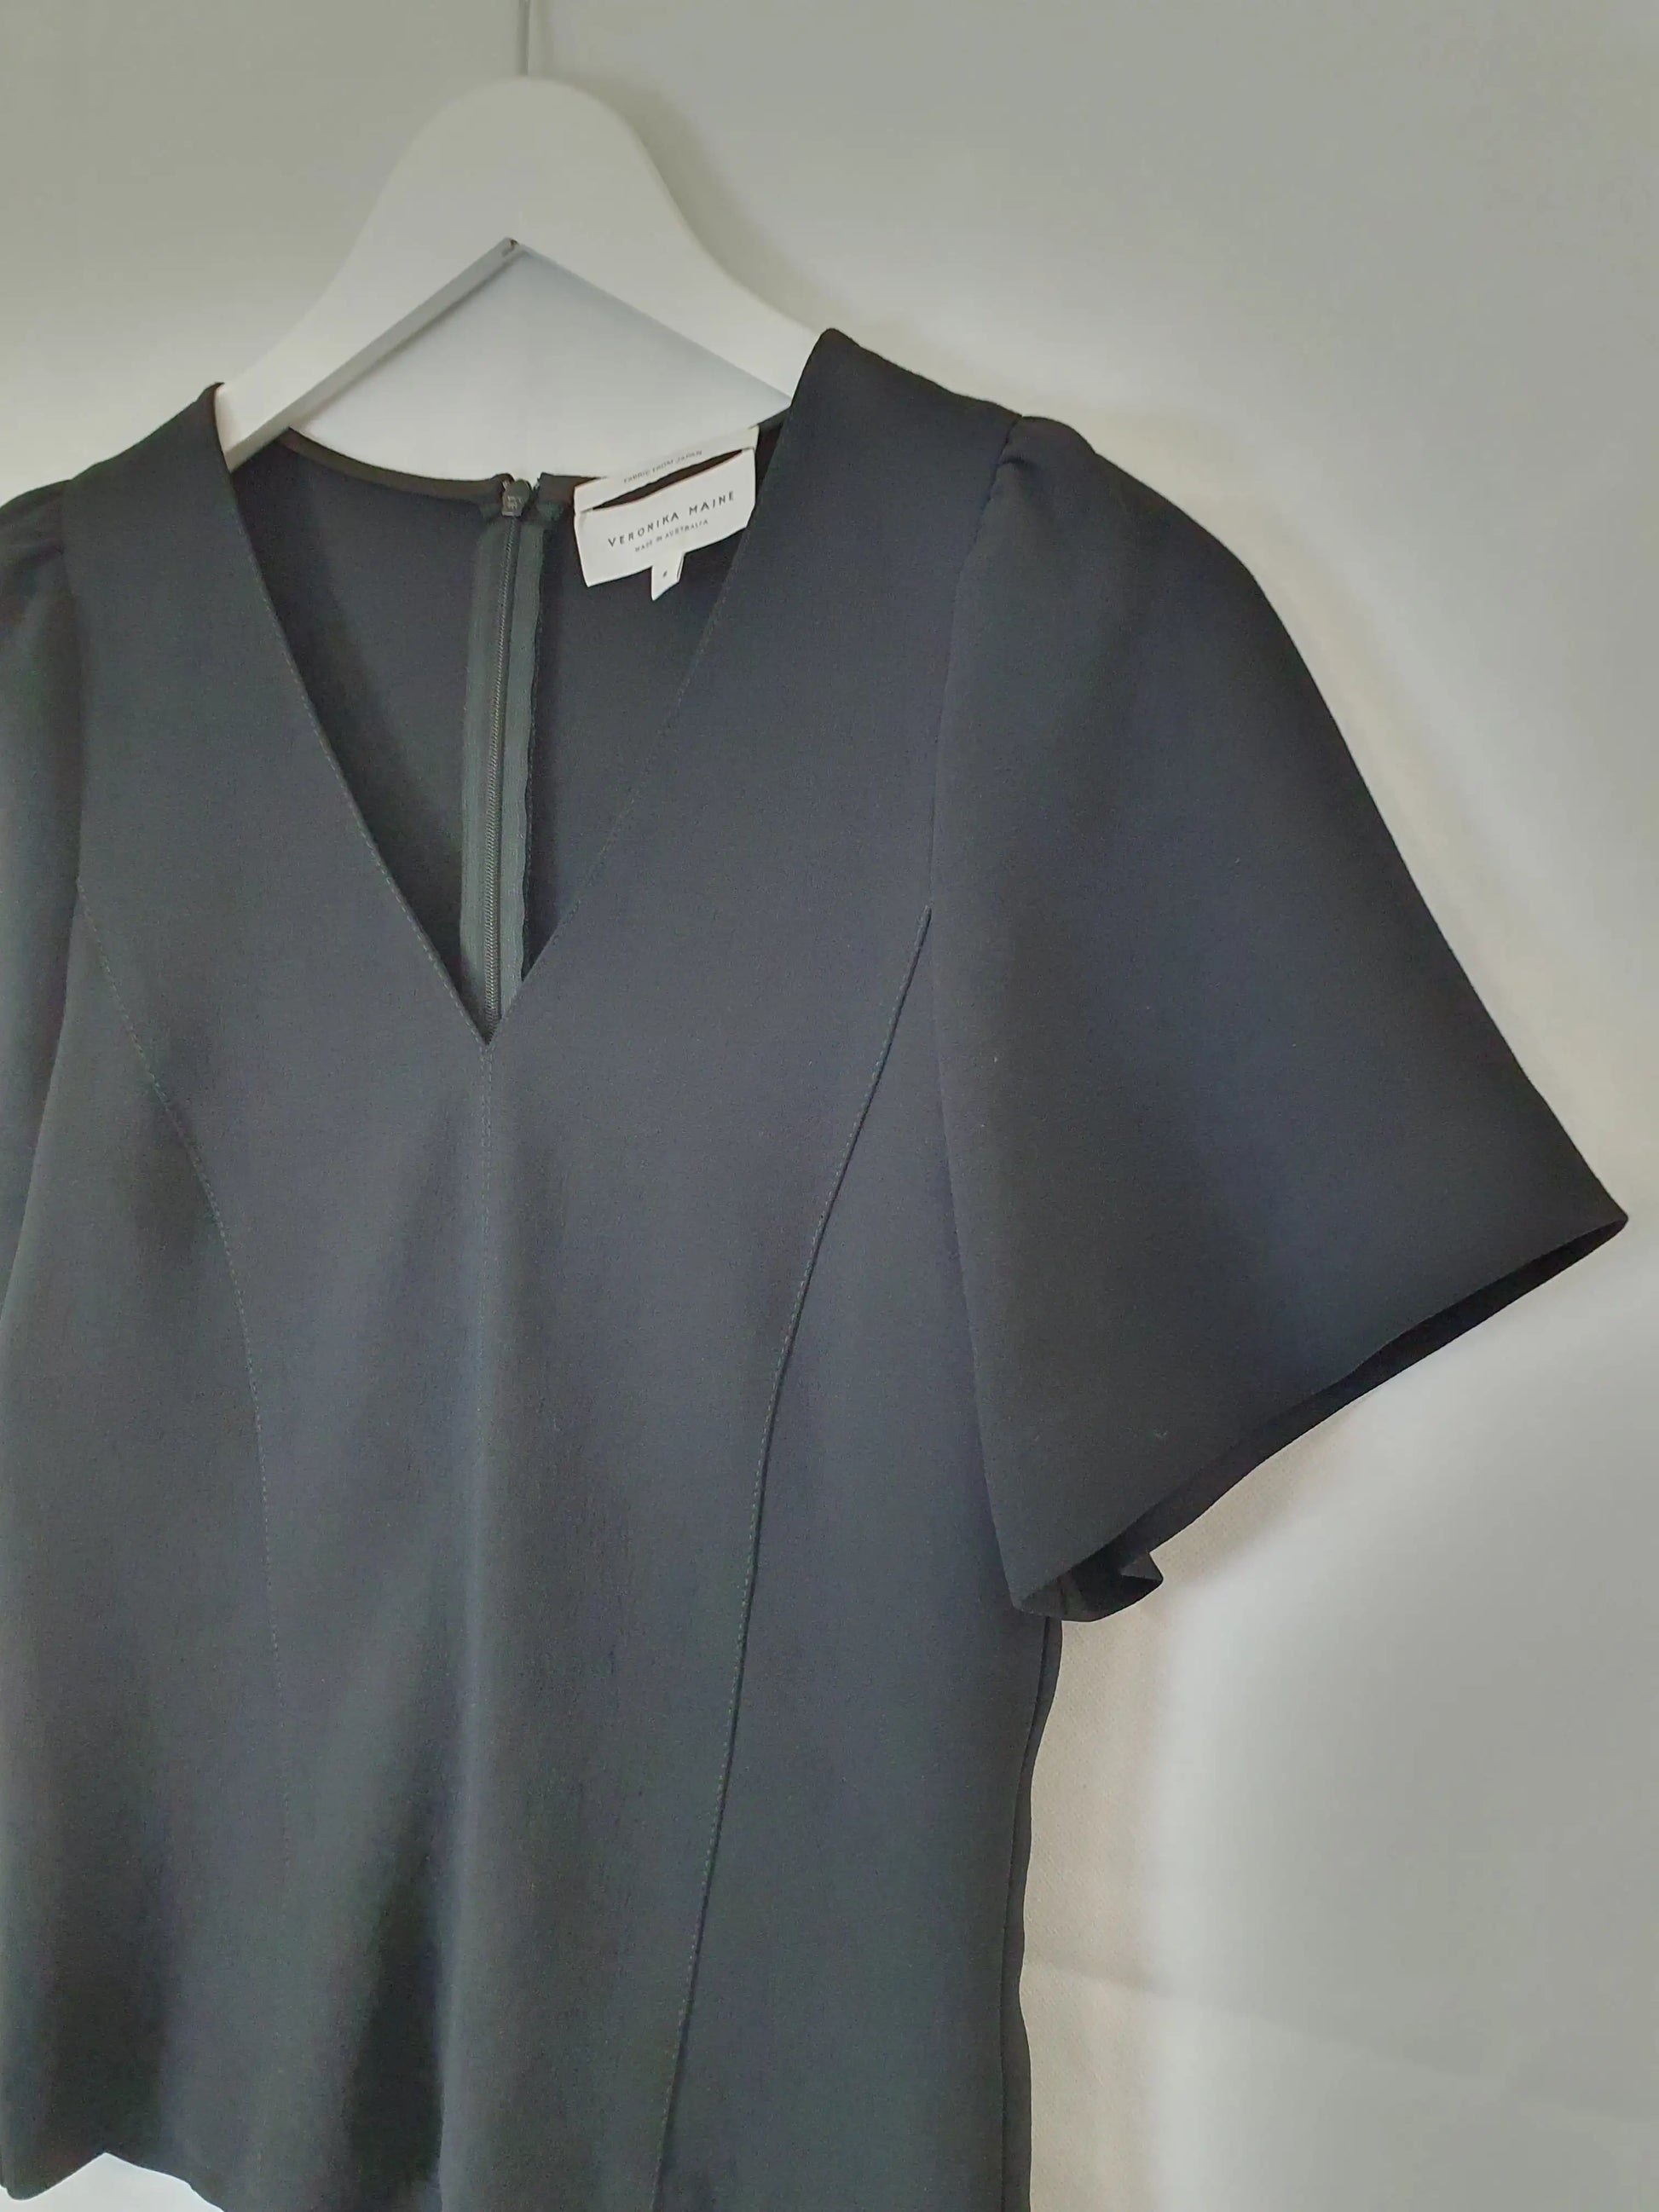 Veronika Maine Office Style Top Size 6 by SwapUp-Second Hand Shop-Thrift Store-Op Shop 